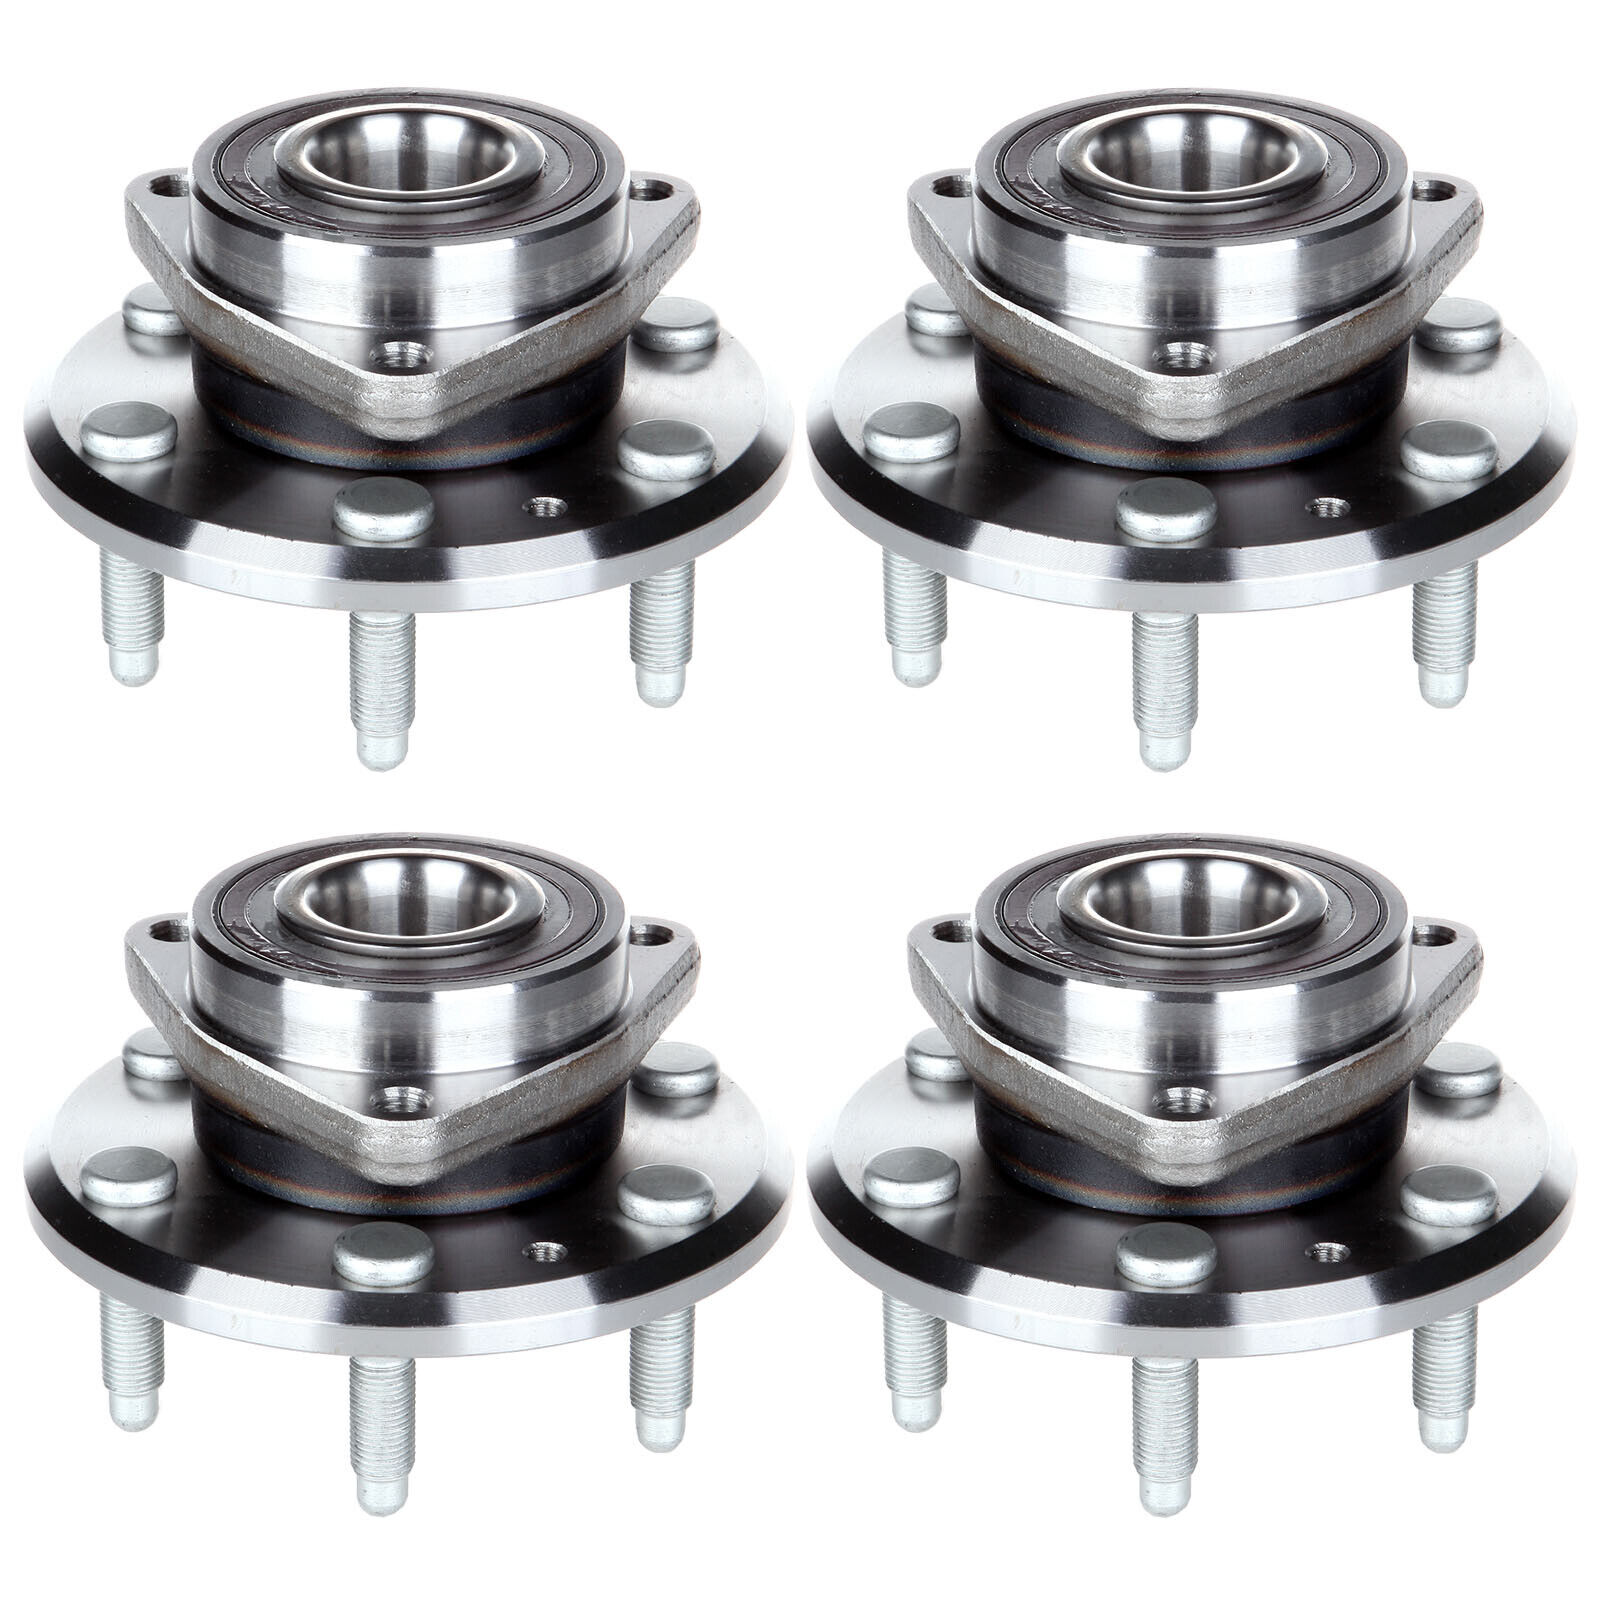 4x Front Rear Wheel Hub Bearing Assembly For Buick Enclave Chevy Traverse GMC